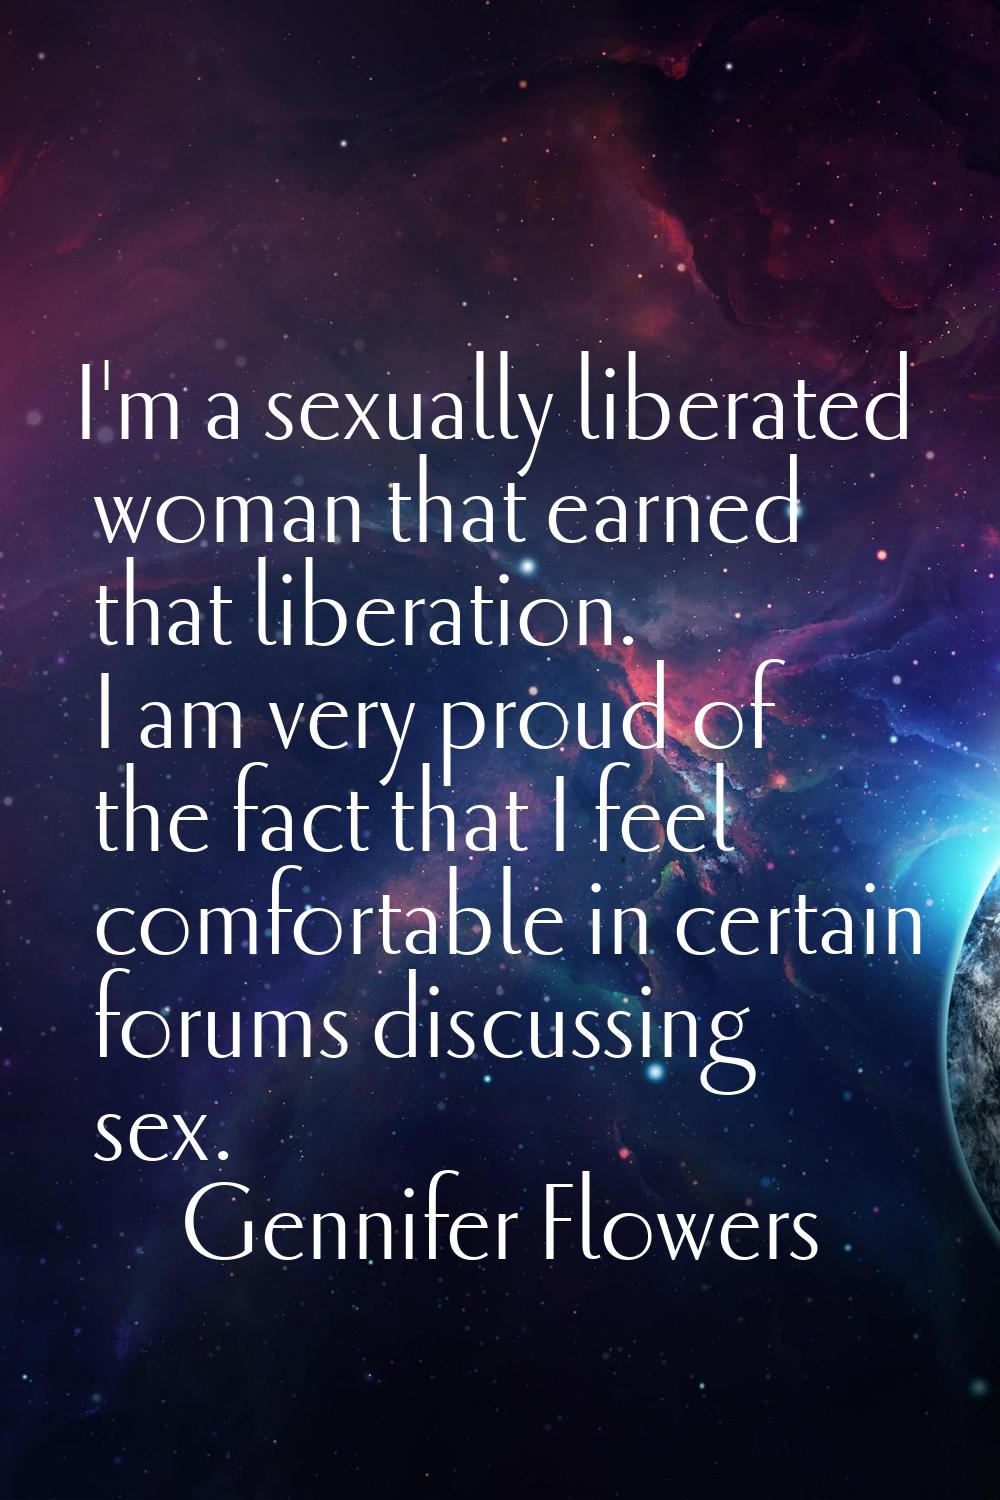 I'm a sexually liberated woman that earned that liberation. I am very proud of the fact that I feel